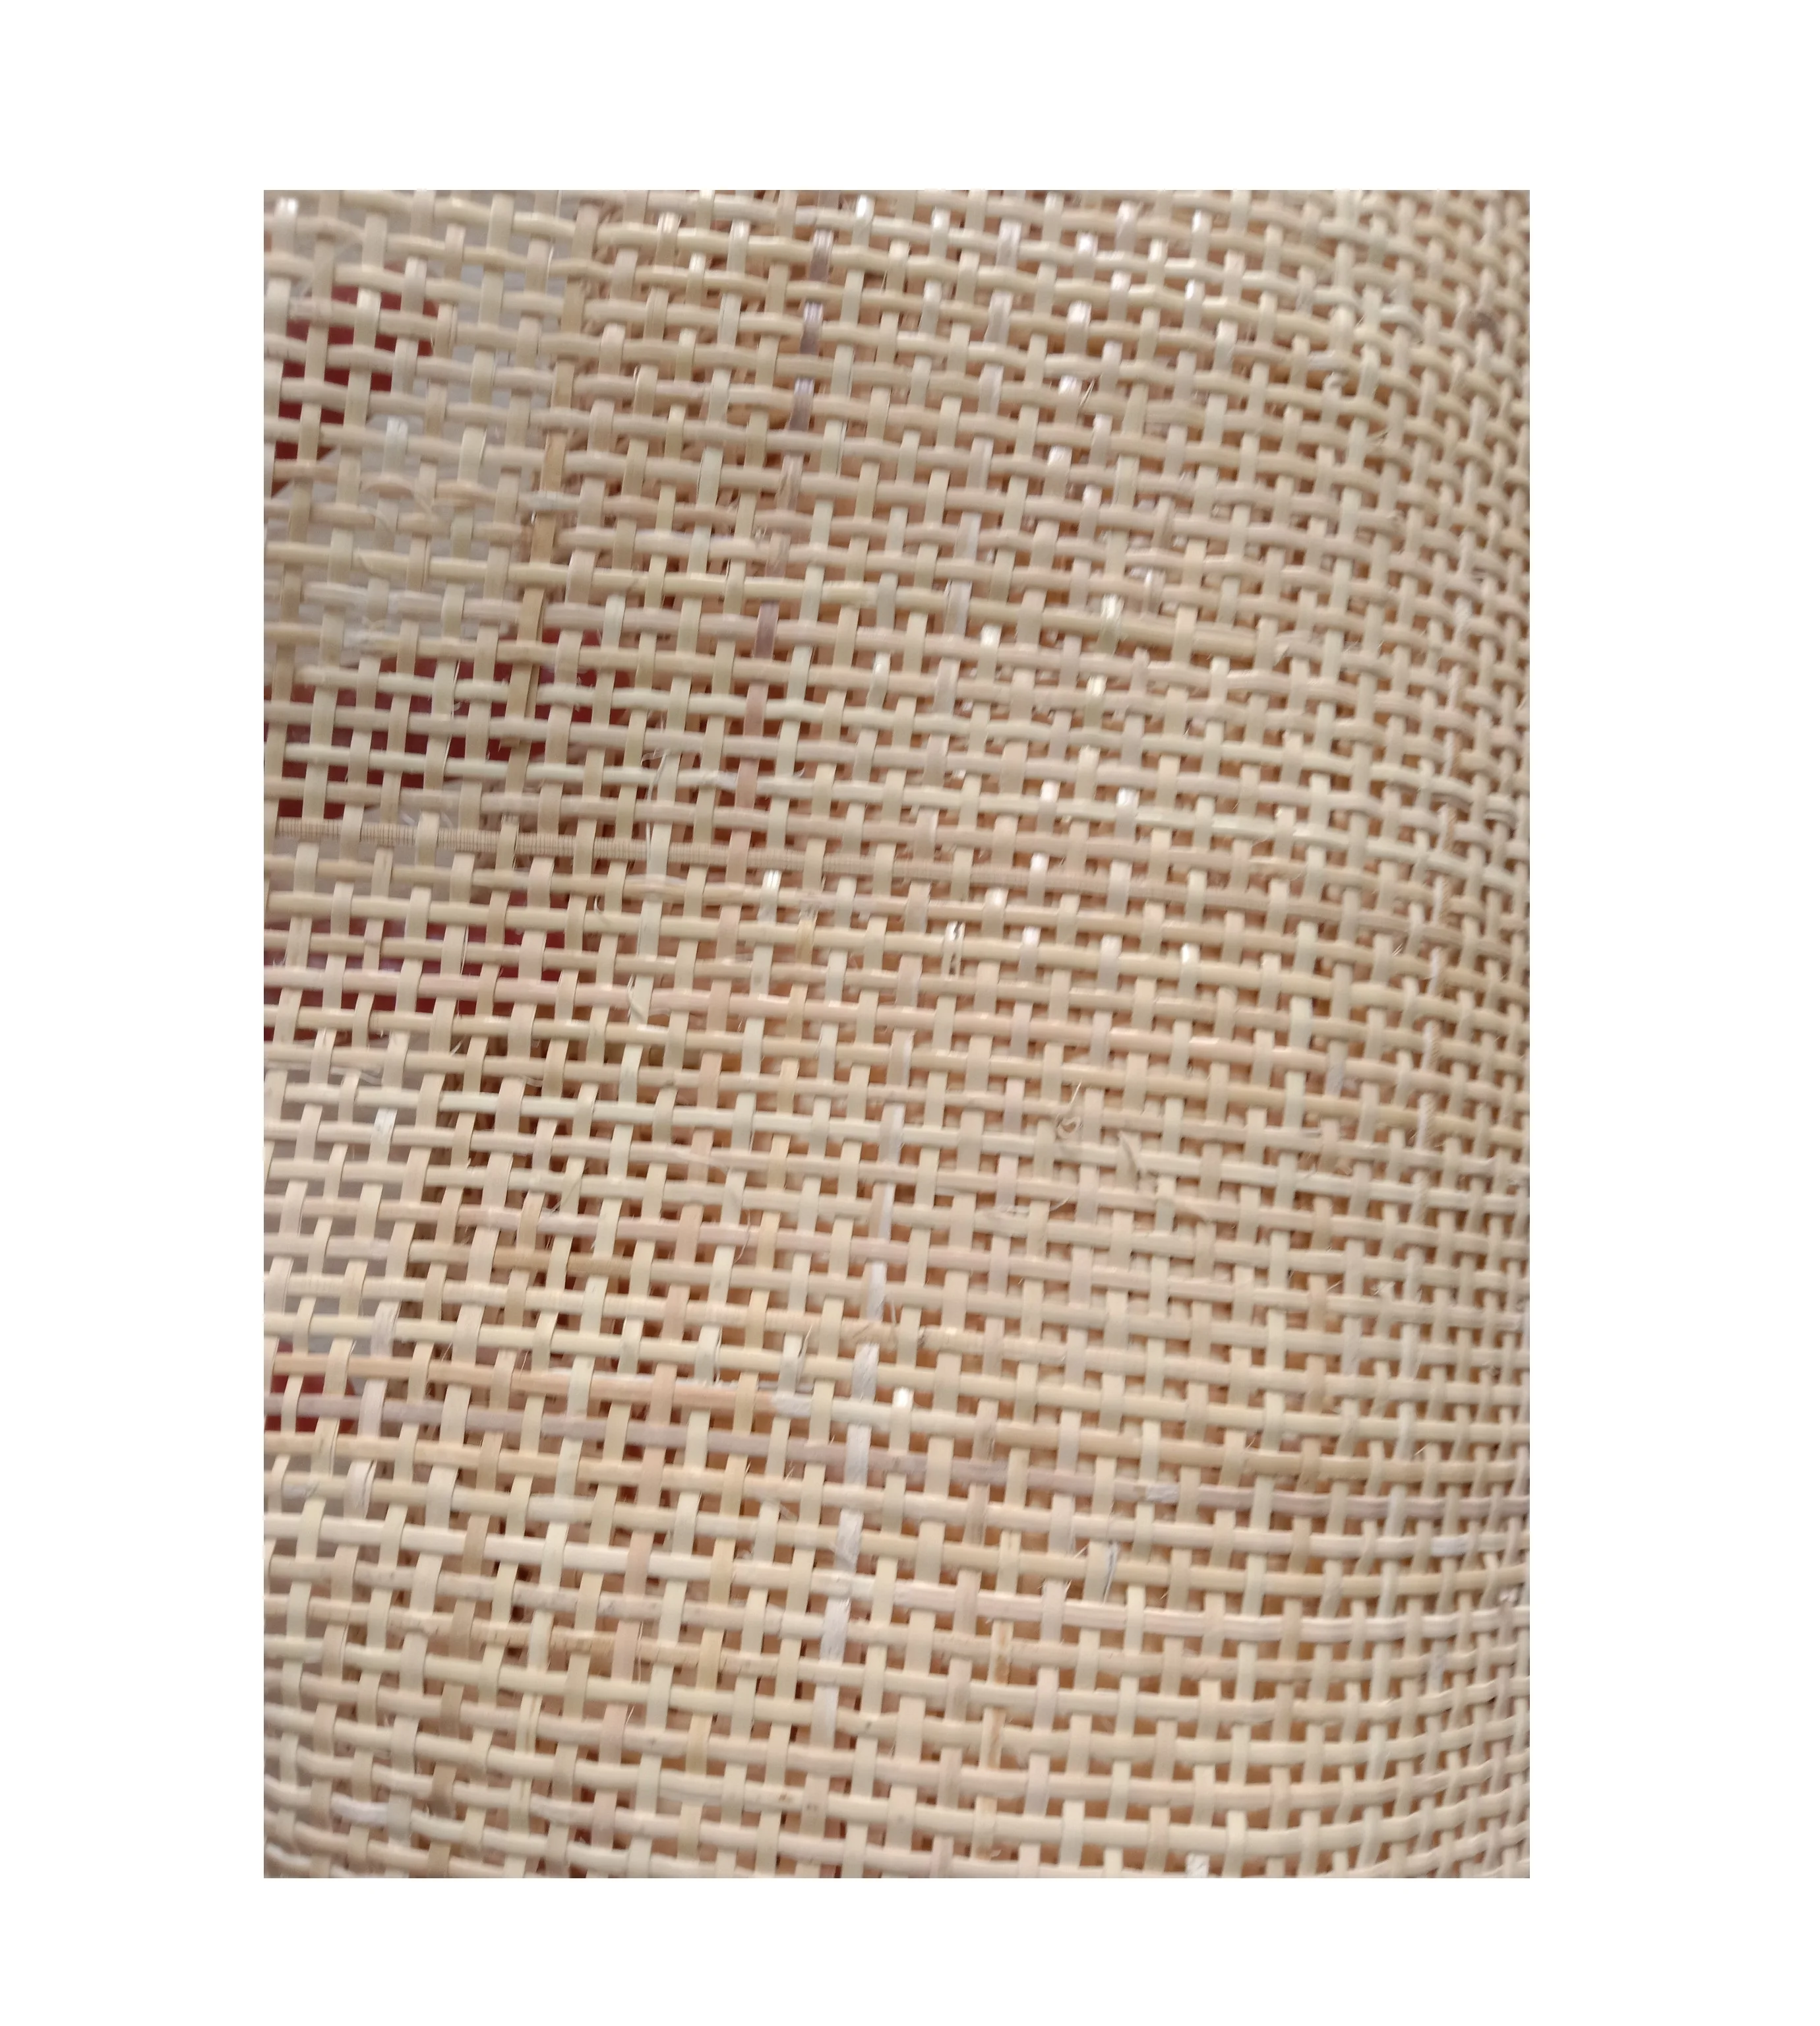 
bleached radio rattan sheet - Vietnam natural color rattan cane rolls with high quality making chair 